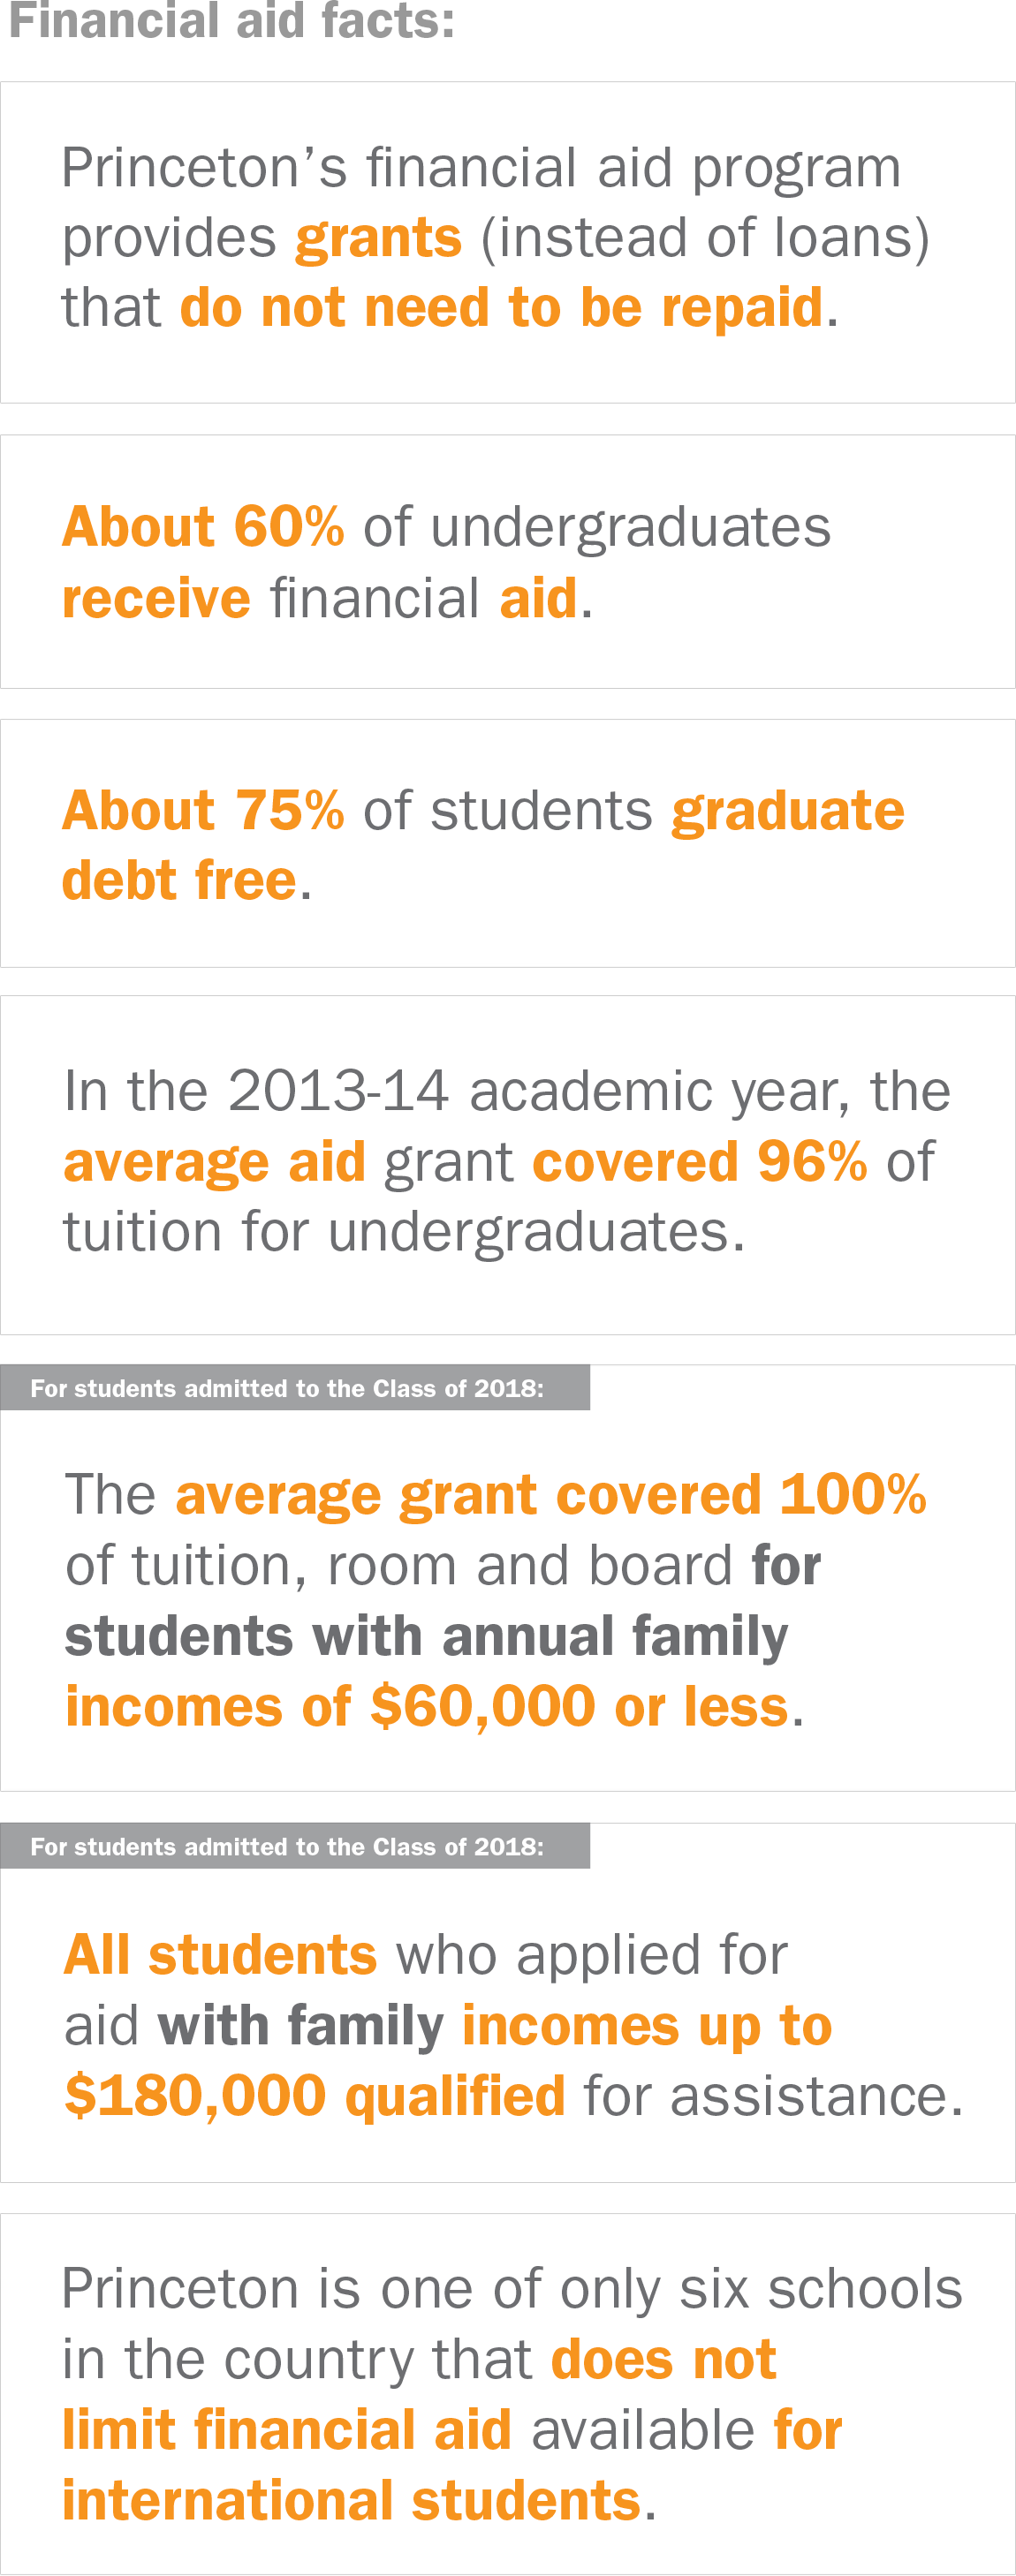 Financial aid facts: Princeton's financial aid program provides grants (instead of loans) that do not need to be repaid. About 60% of undergraduates receive financial aid. About 75% of students graduate debt free. In the 2013-14 academic year, the average aid grant covered 96% of tuition for undergraduates. For students admitted to the Class of 2018: The average grant covered 100% of tuition, room and board for students with annual family incomes of $60,000 or less. For students admitted to the Class of ...